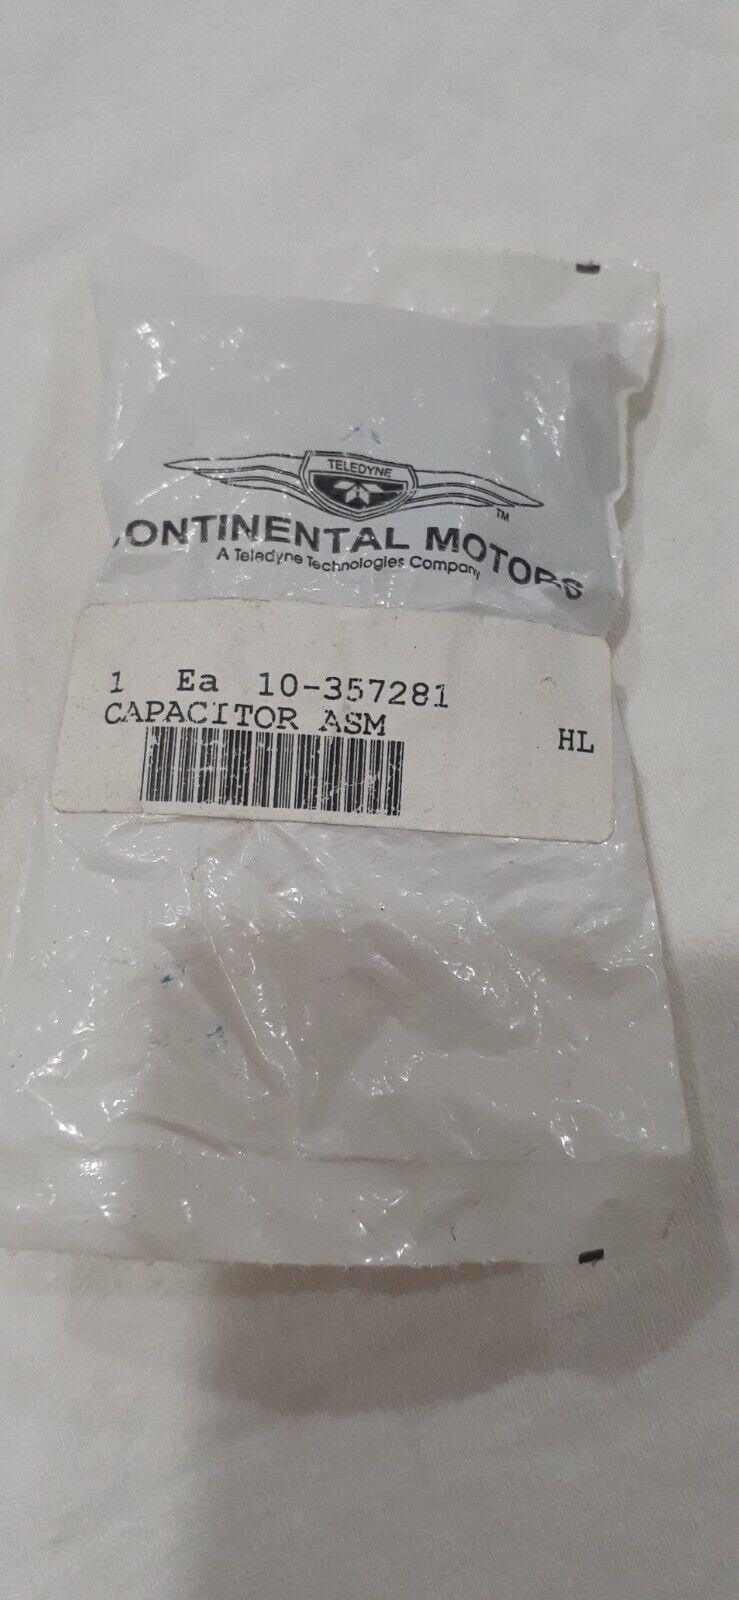 CONTINENTAL MAGNETO CAPACITOR 10-357281